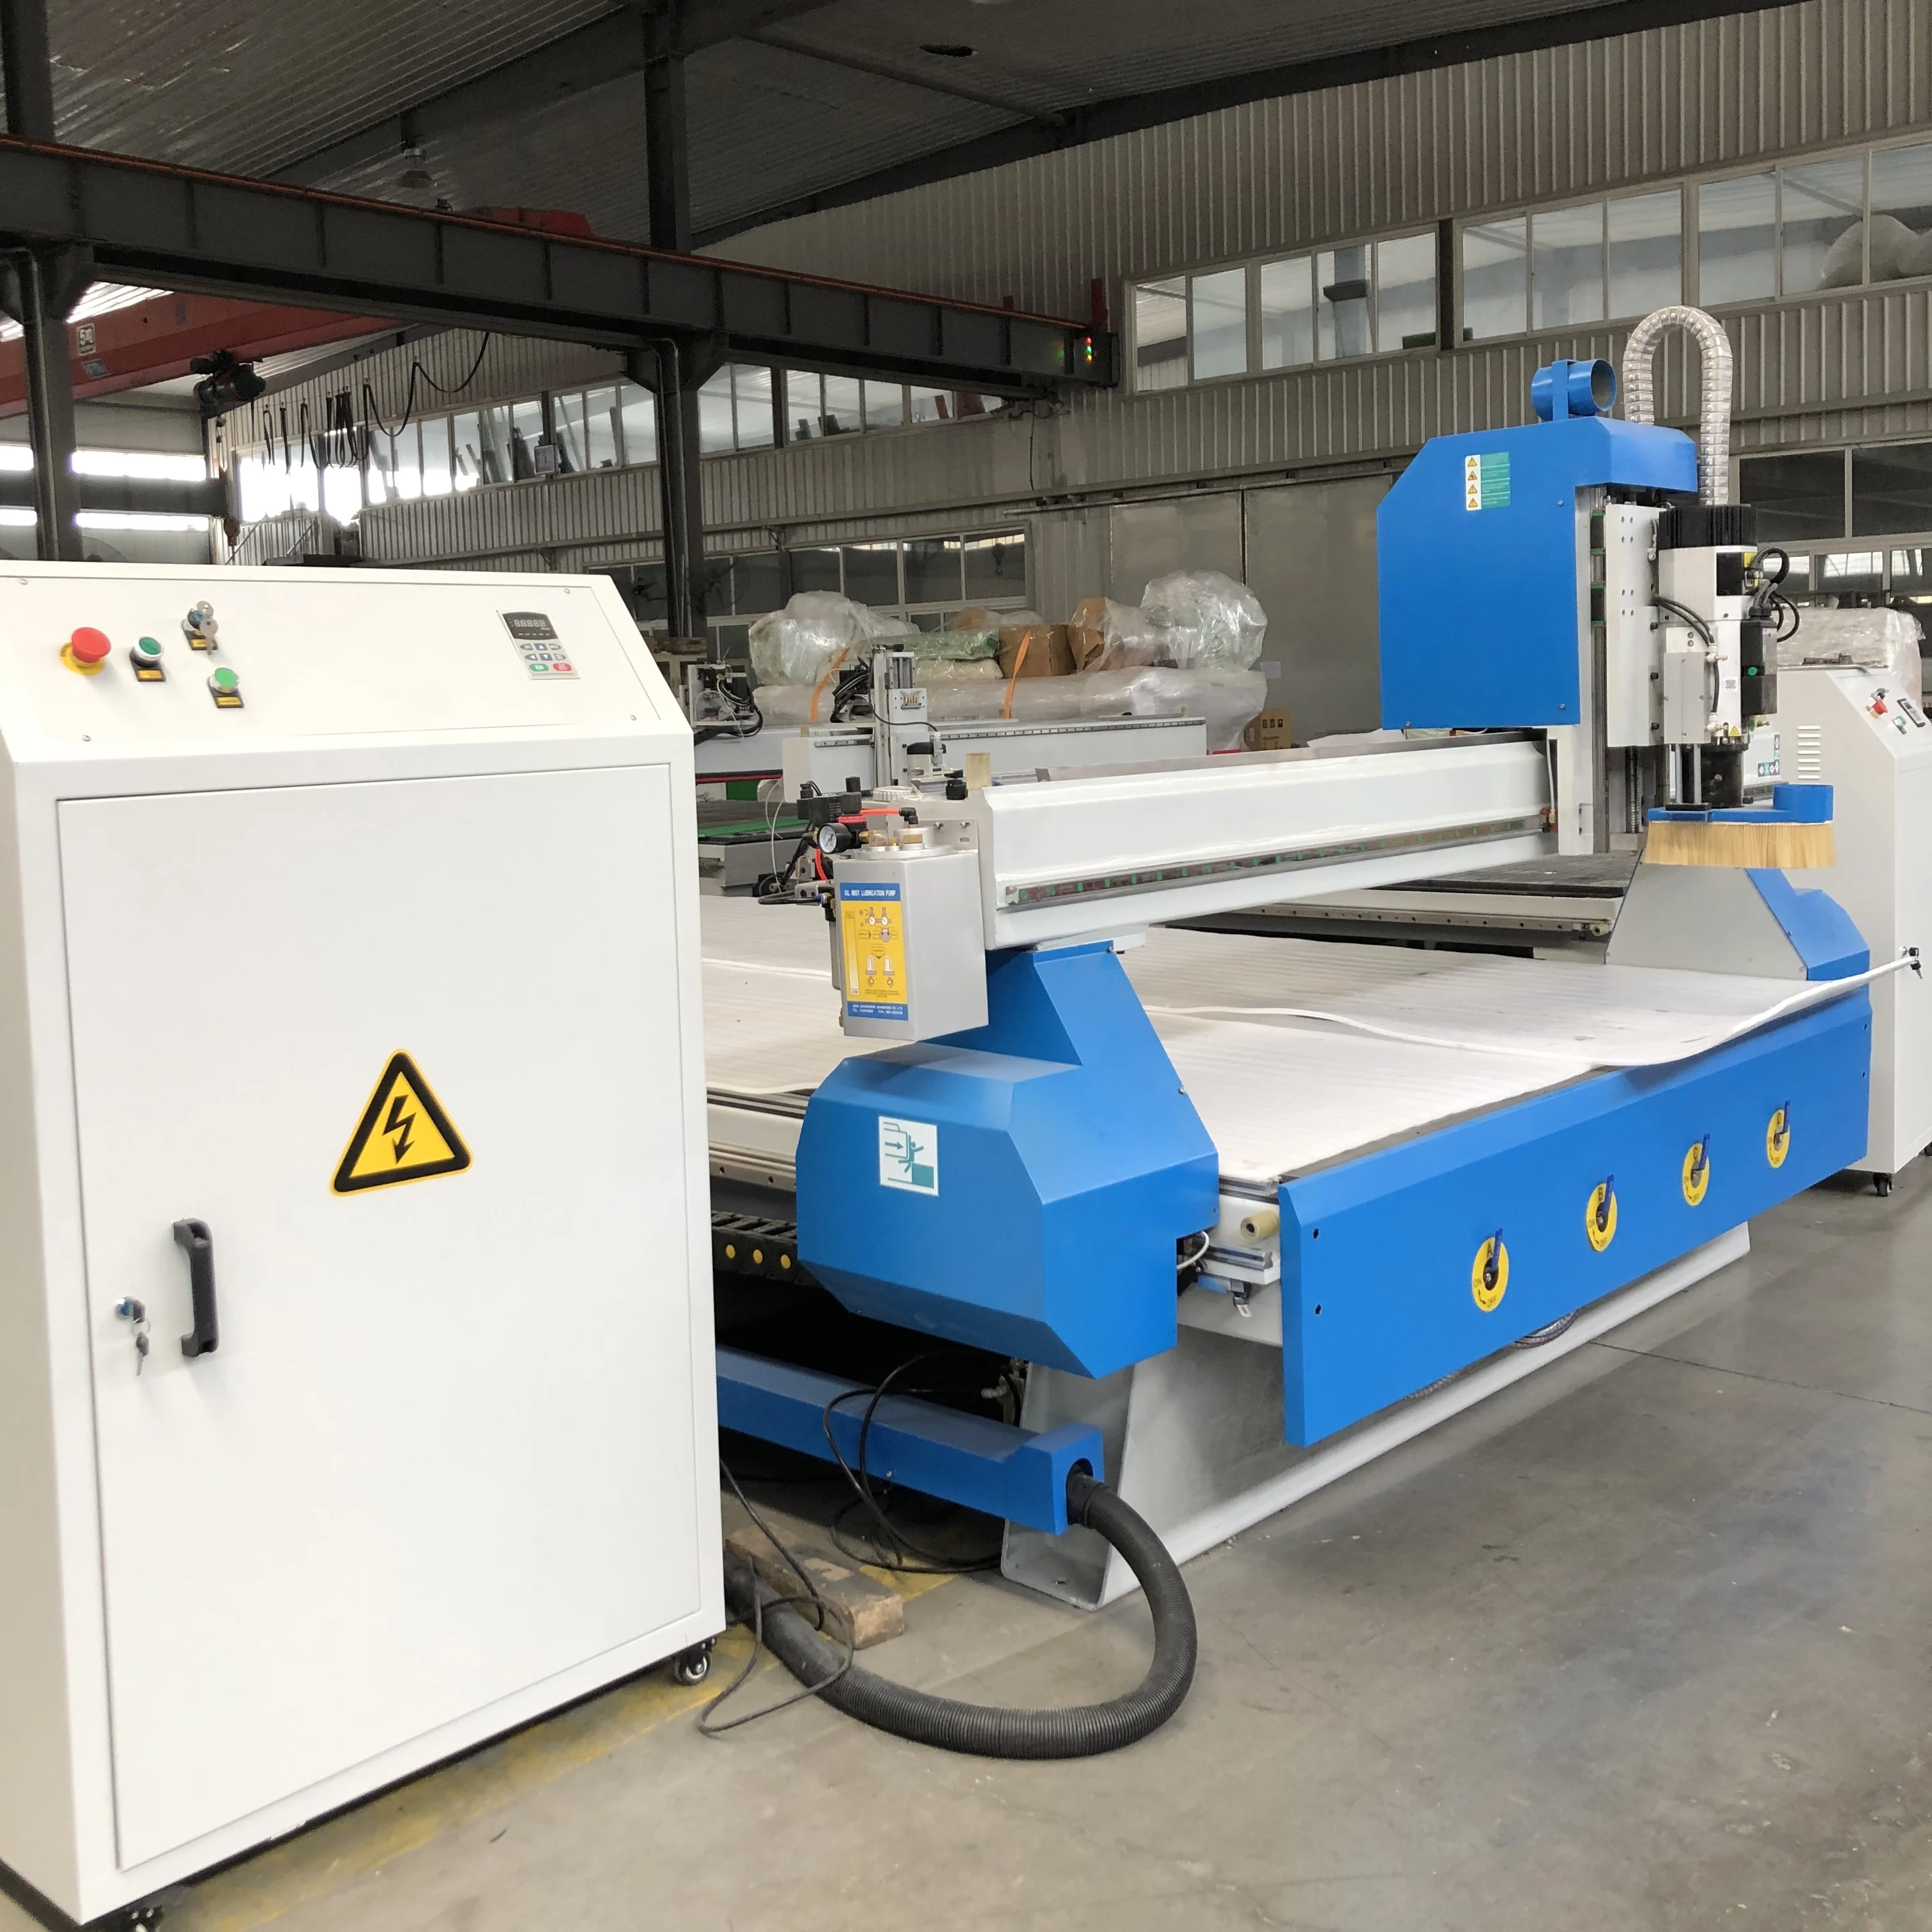 High Quality Atc Cnc Router Woodworking For Wood Machine Rj 1325 1530 2040 Buy Woodworking Cnc Machine Wood Engraving Machine Wood Cnc Router Product On Alibaba Com